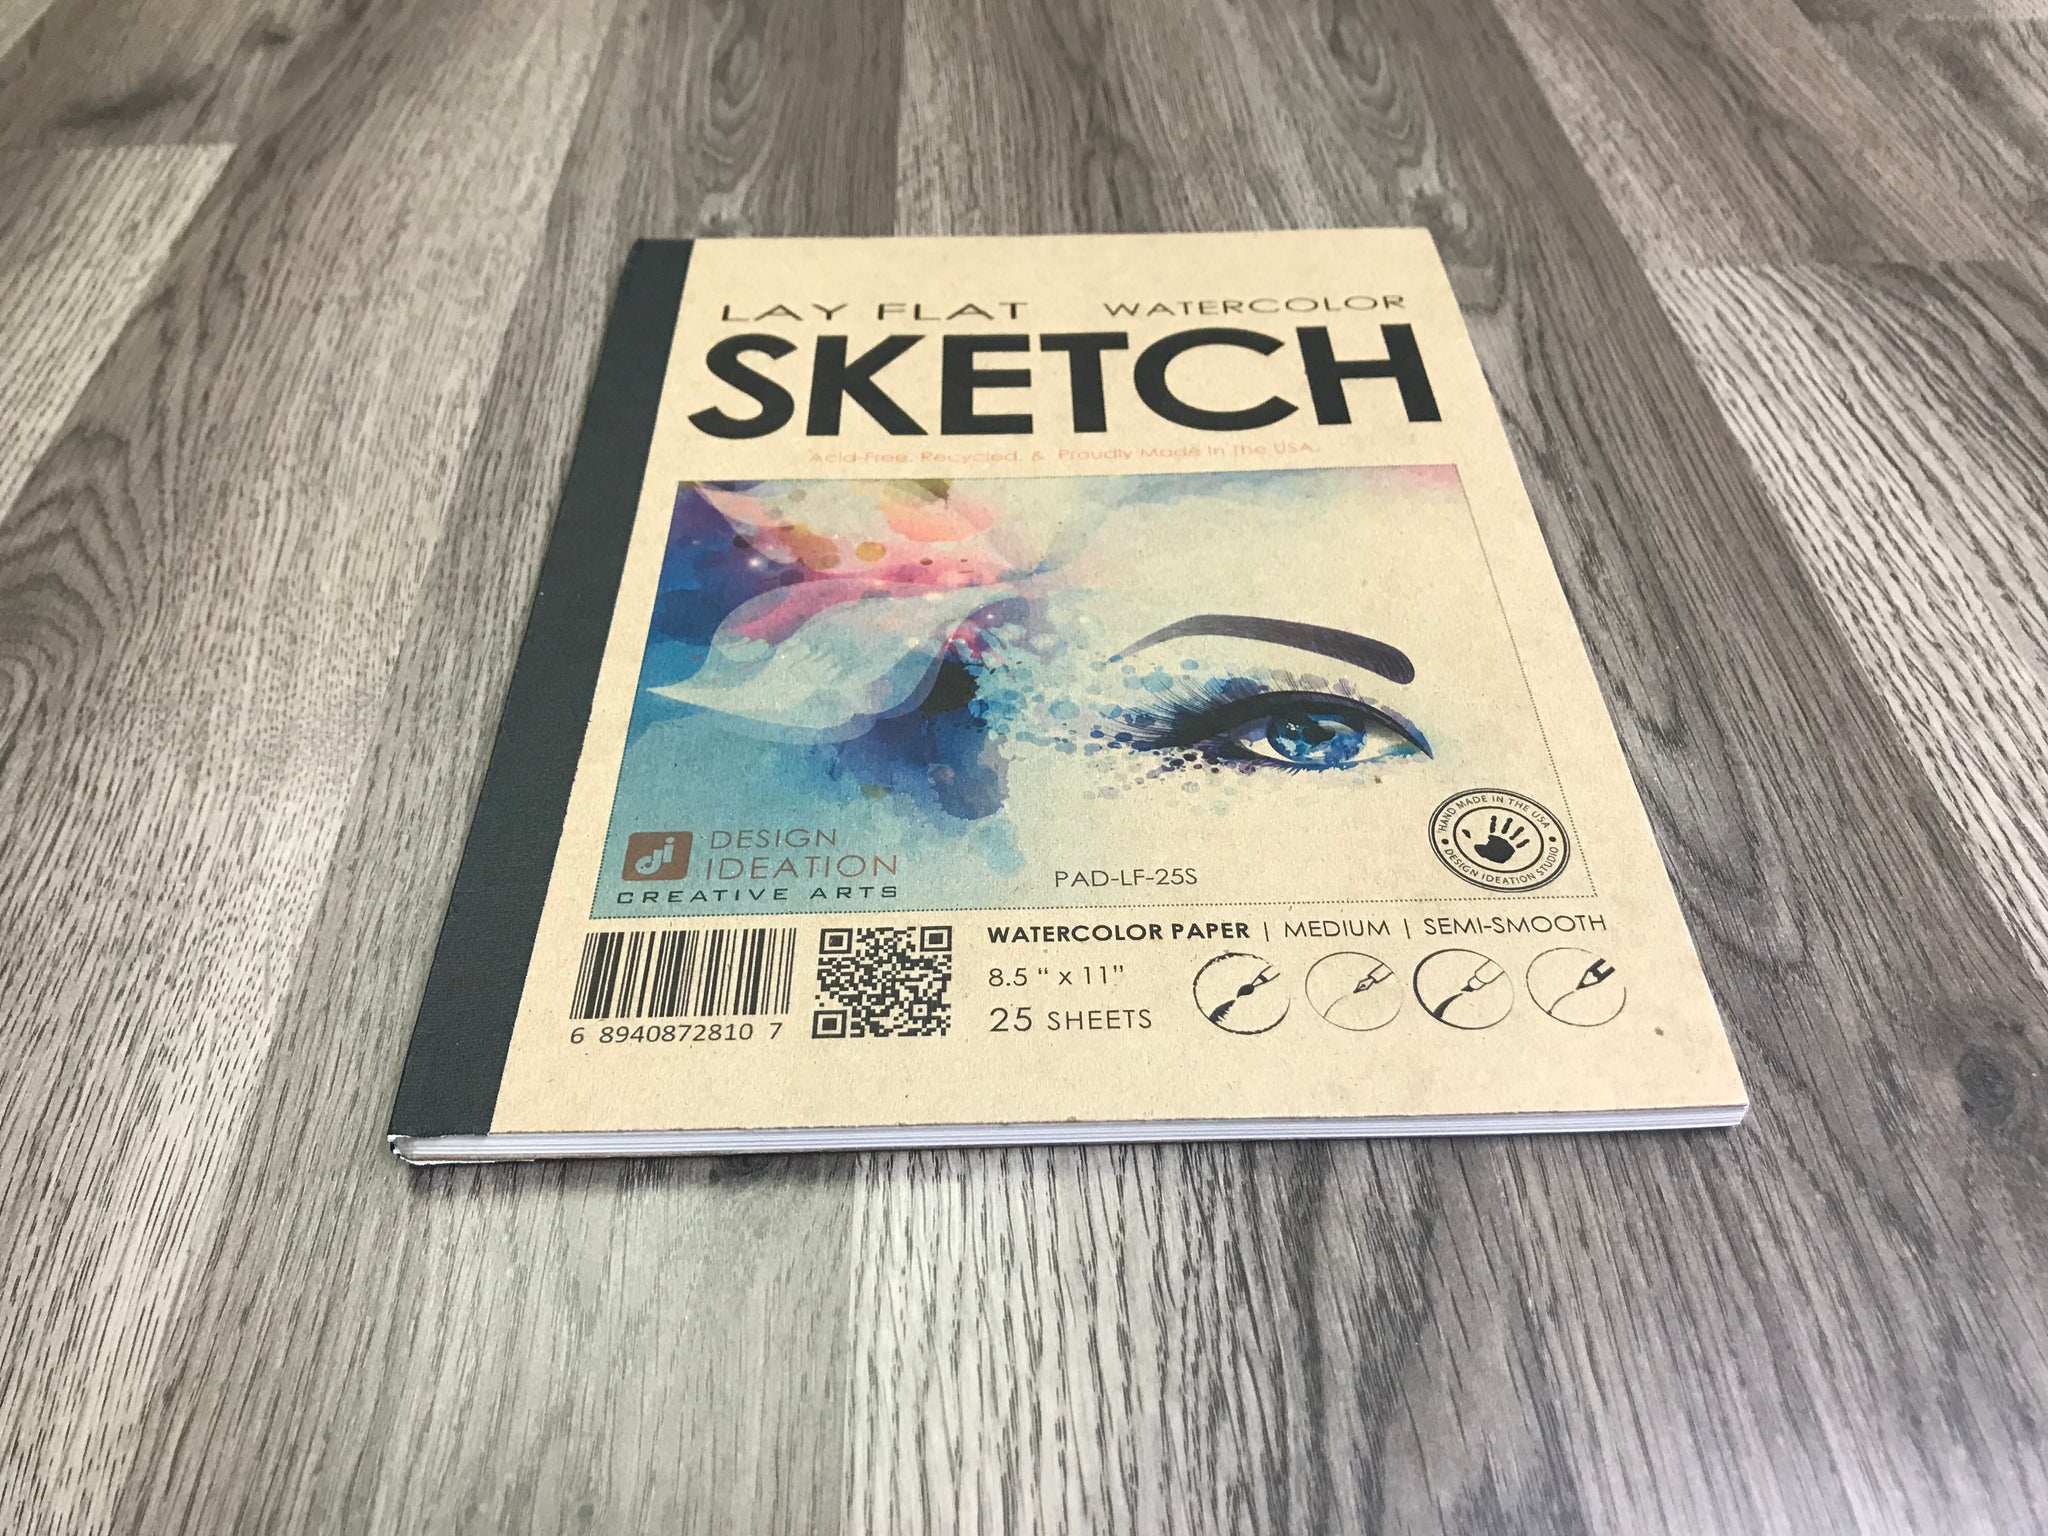 Grid Sketchbook. Spiral Bound Journal Style Sketchbook for Pencil, Ink,  Marker, Charcoal and Watercolor Paints. Art, Design and Education. (8.5 x